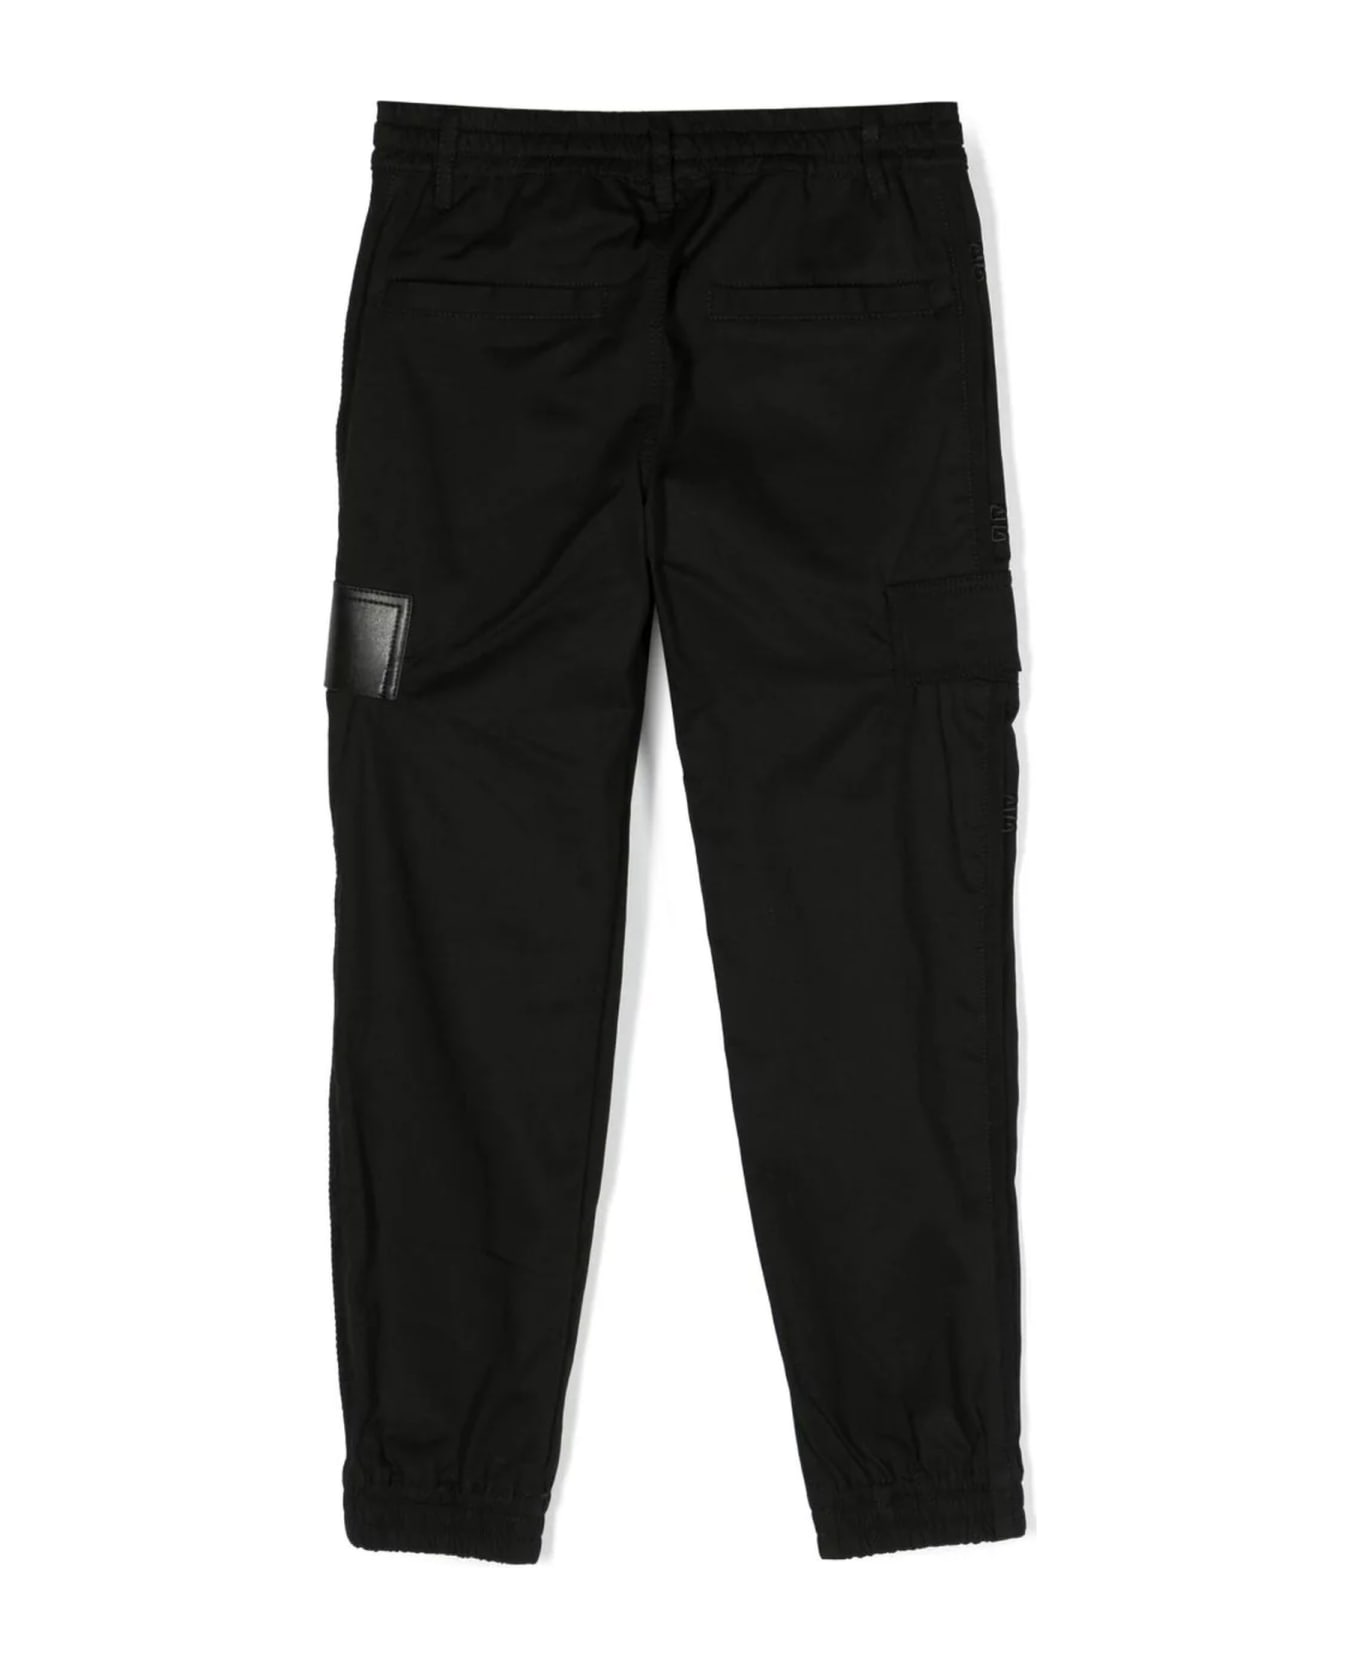 Givenchy Kids Trousers Black - Black ボトムス